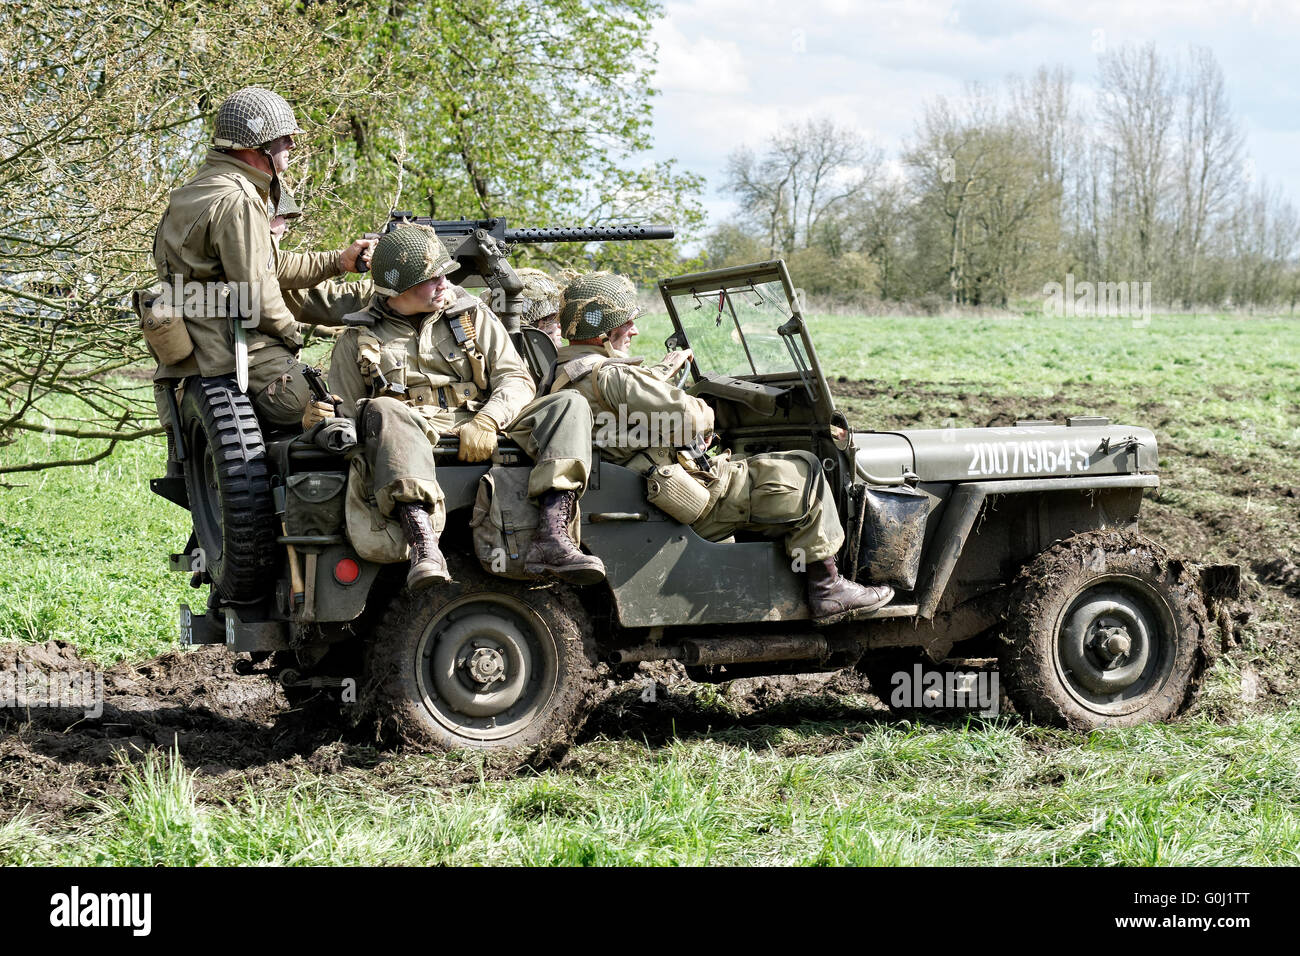 US Army Soldiers aboard a jeep. Stock Photo